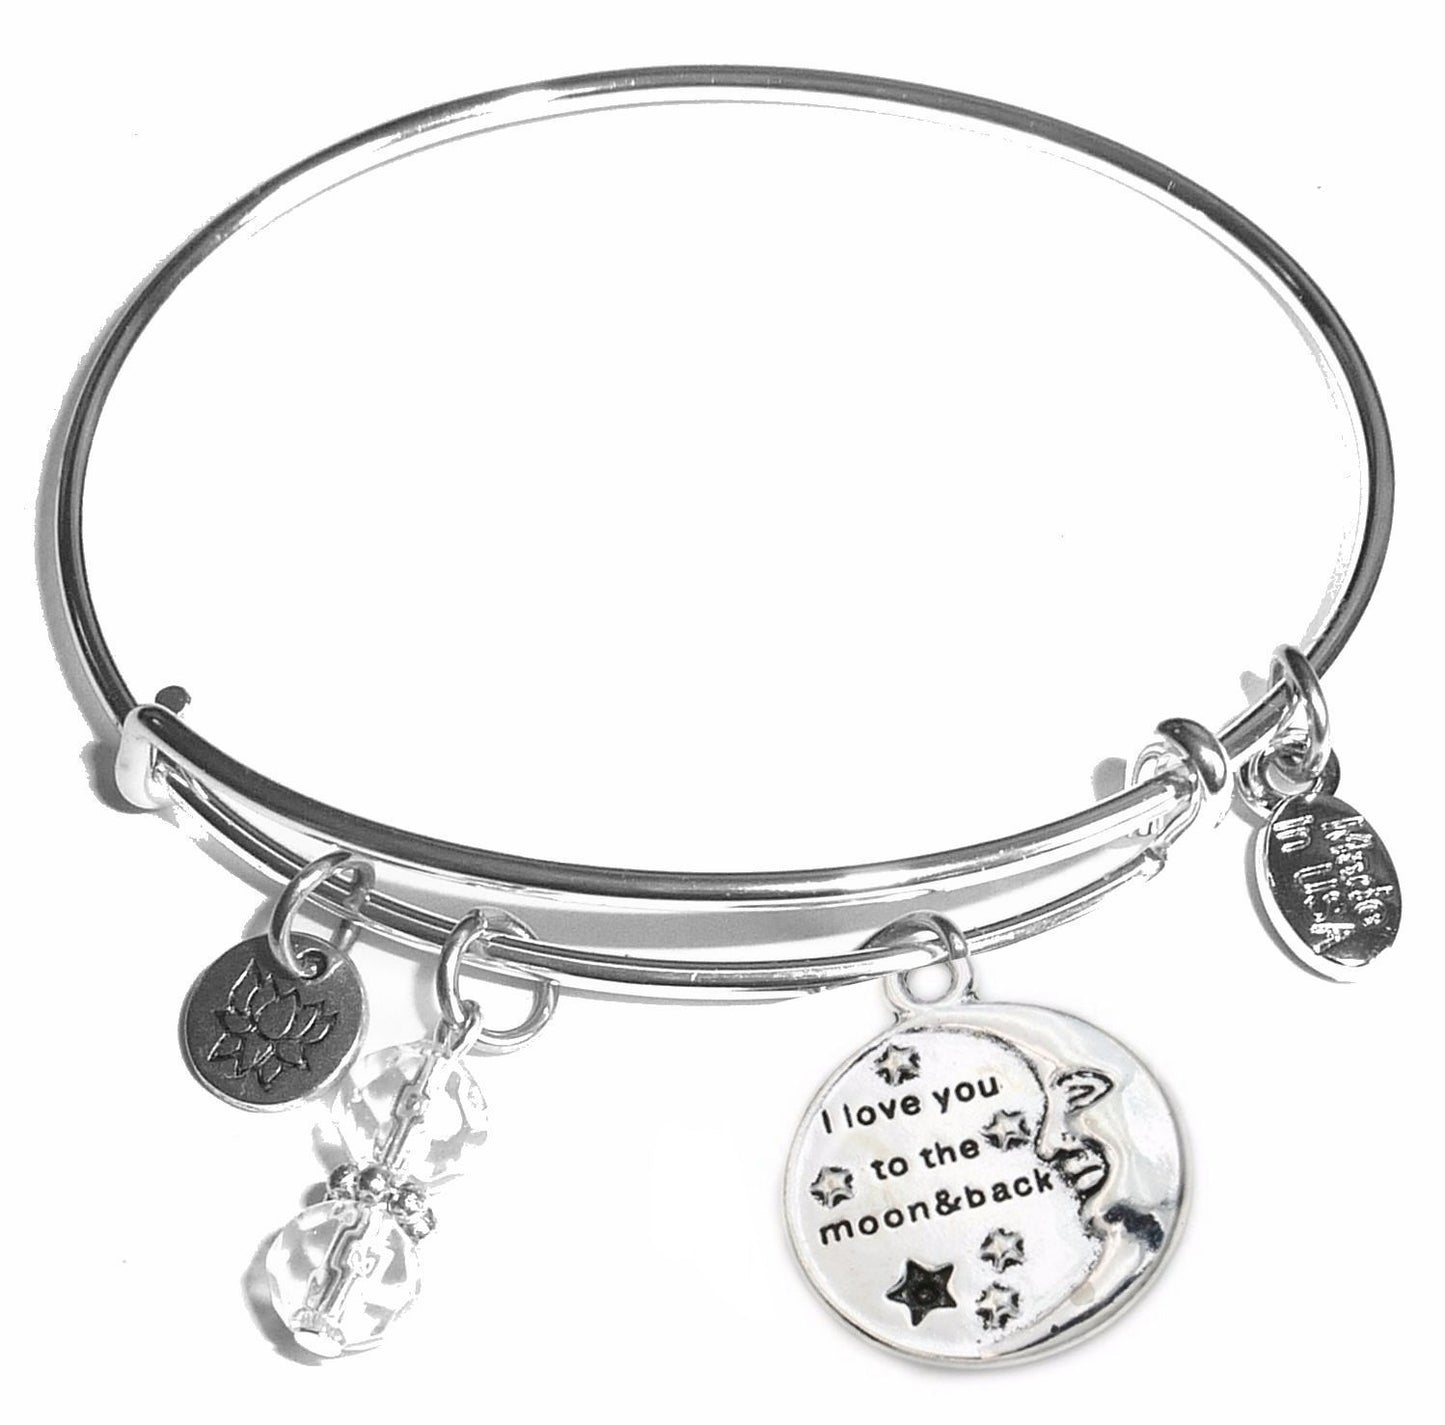 I Love you to the Moon - Message Bangle Bracelet - Expandable Wire Bracelet– Comes in a gift box